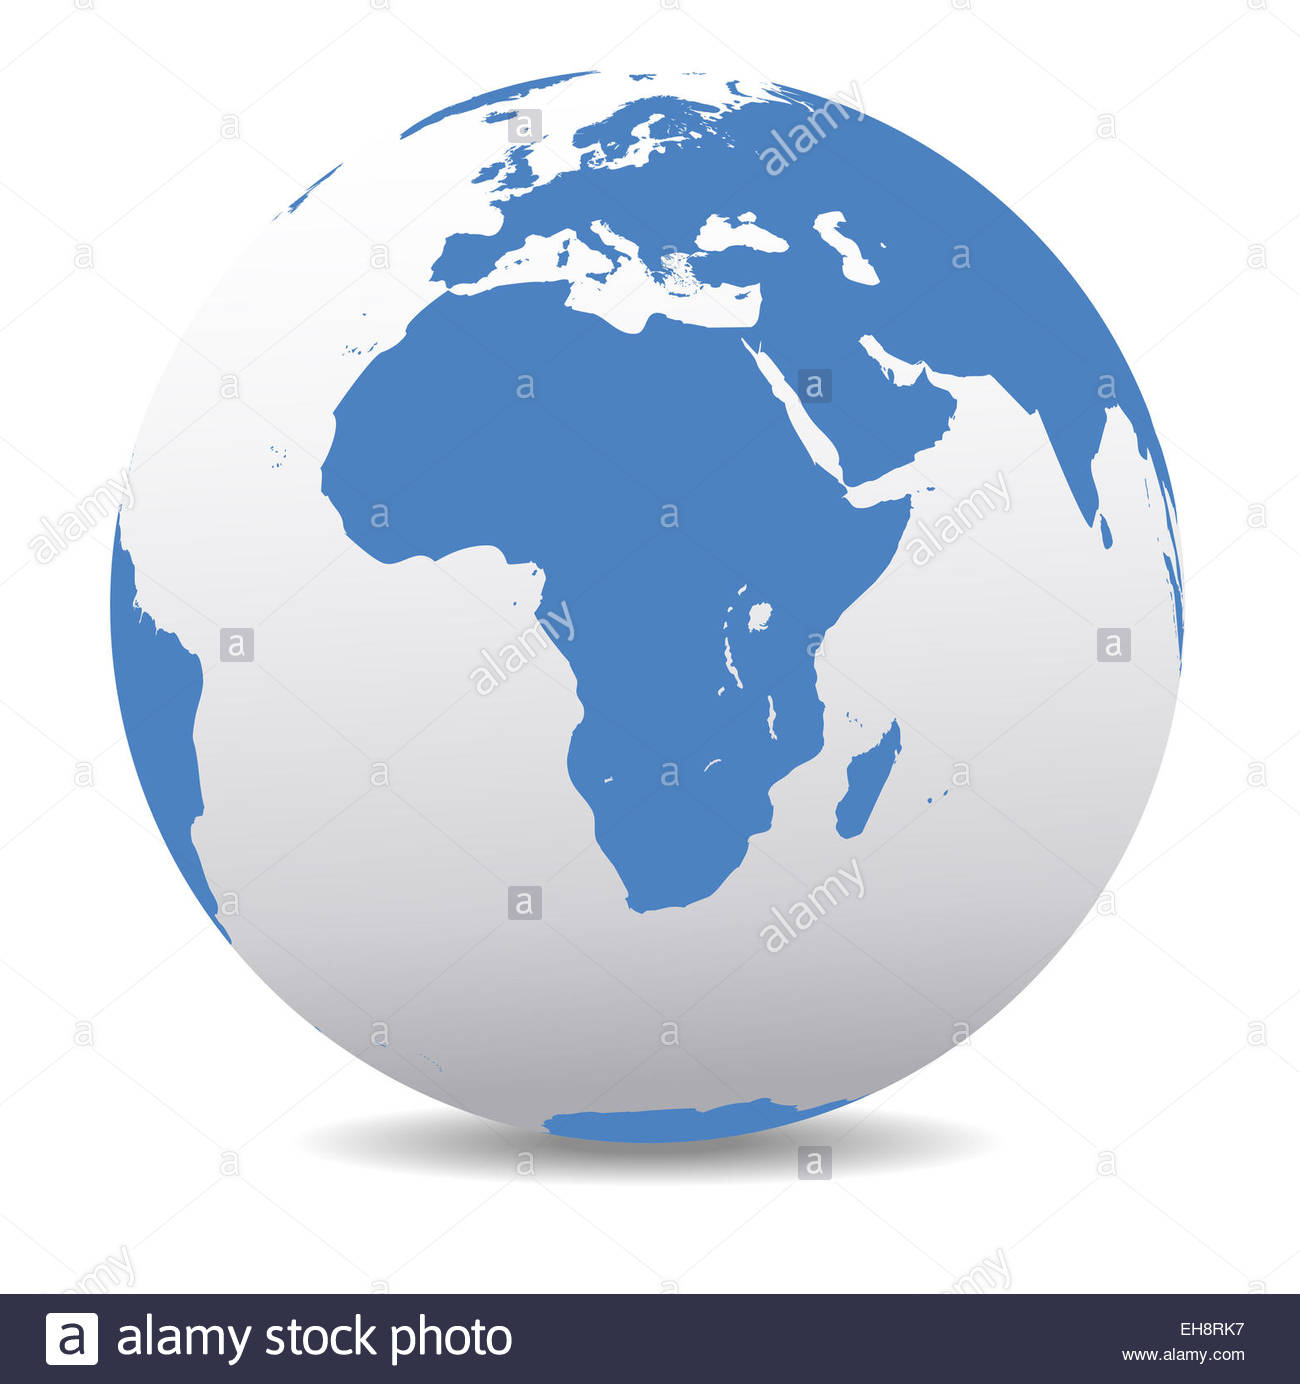 Africa, continent, continents, countries, country, location, map 